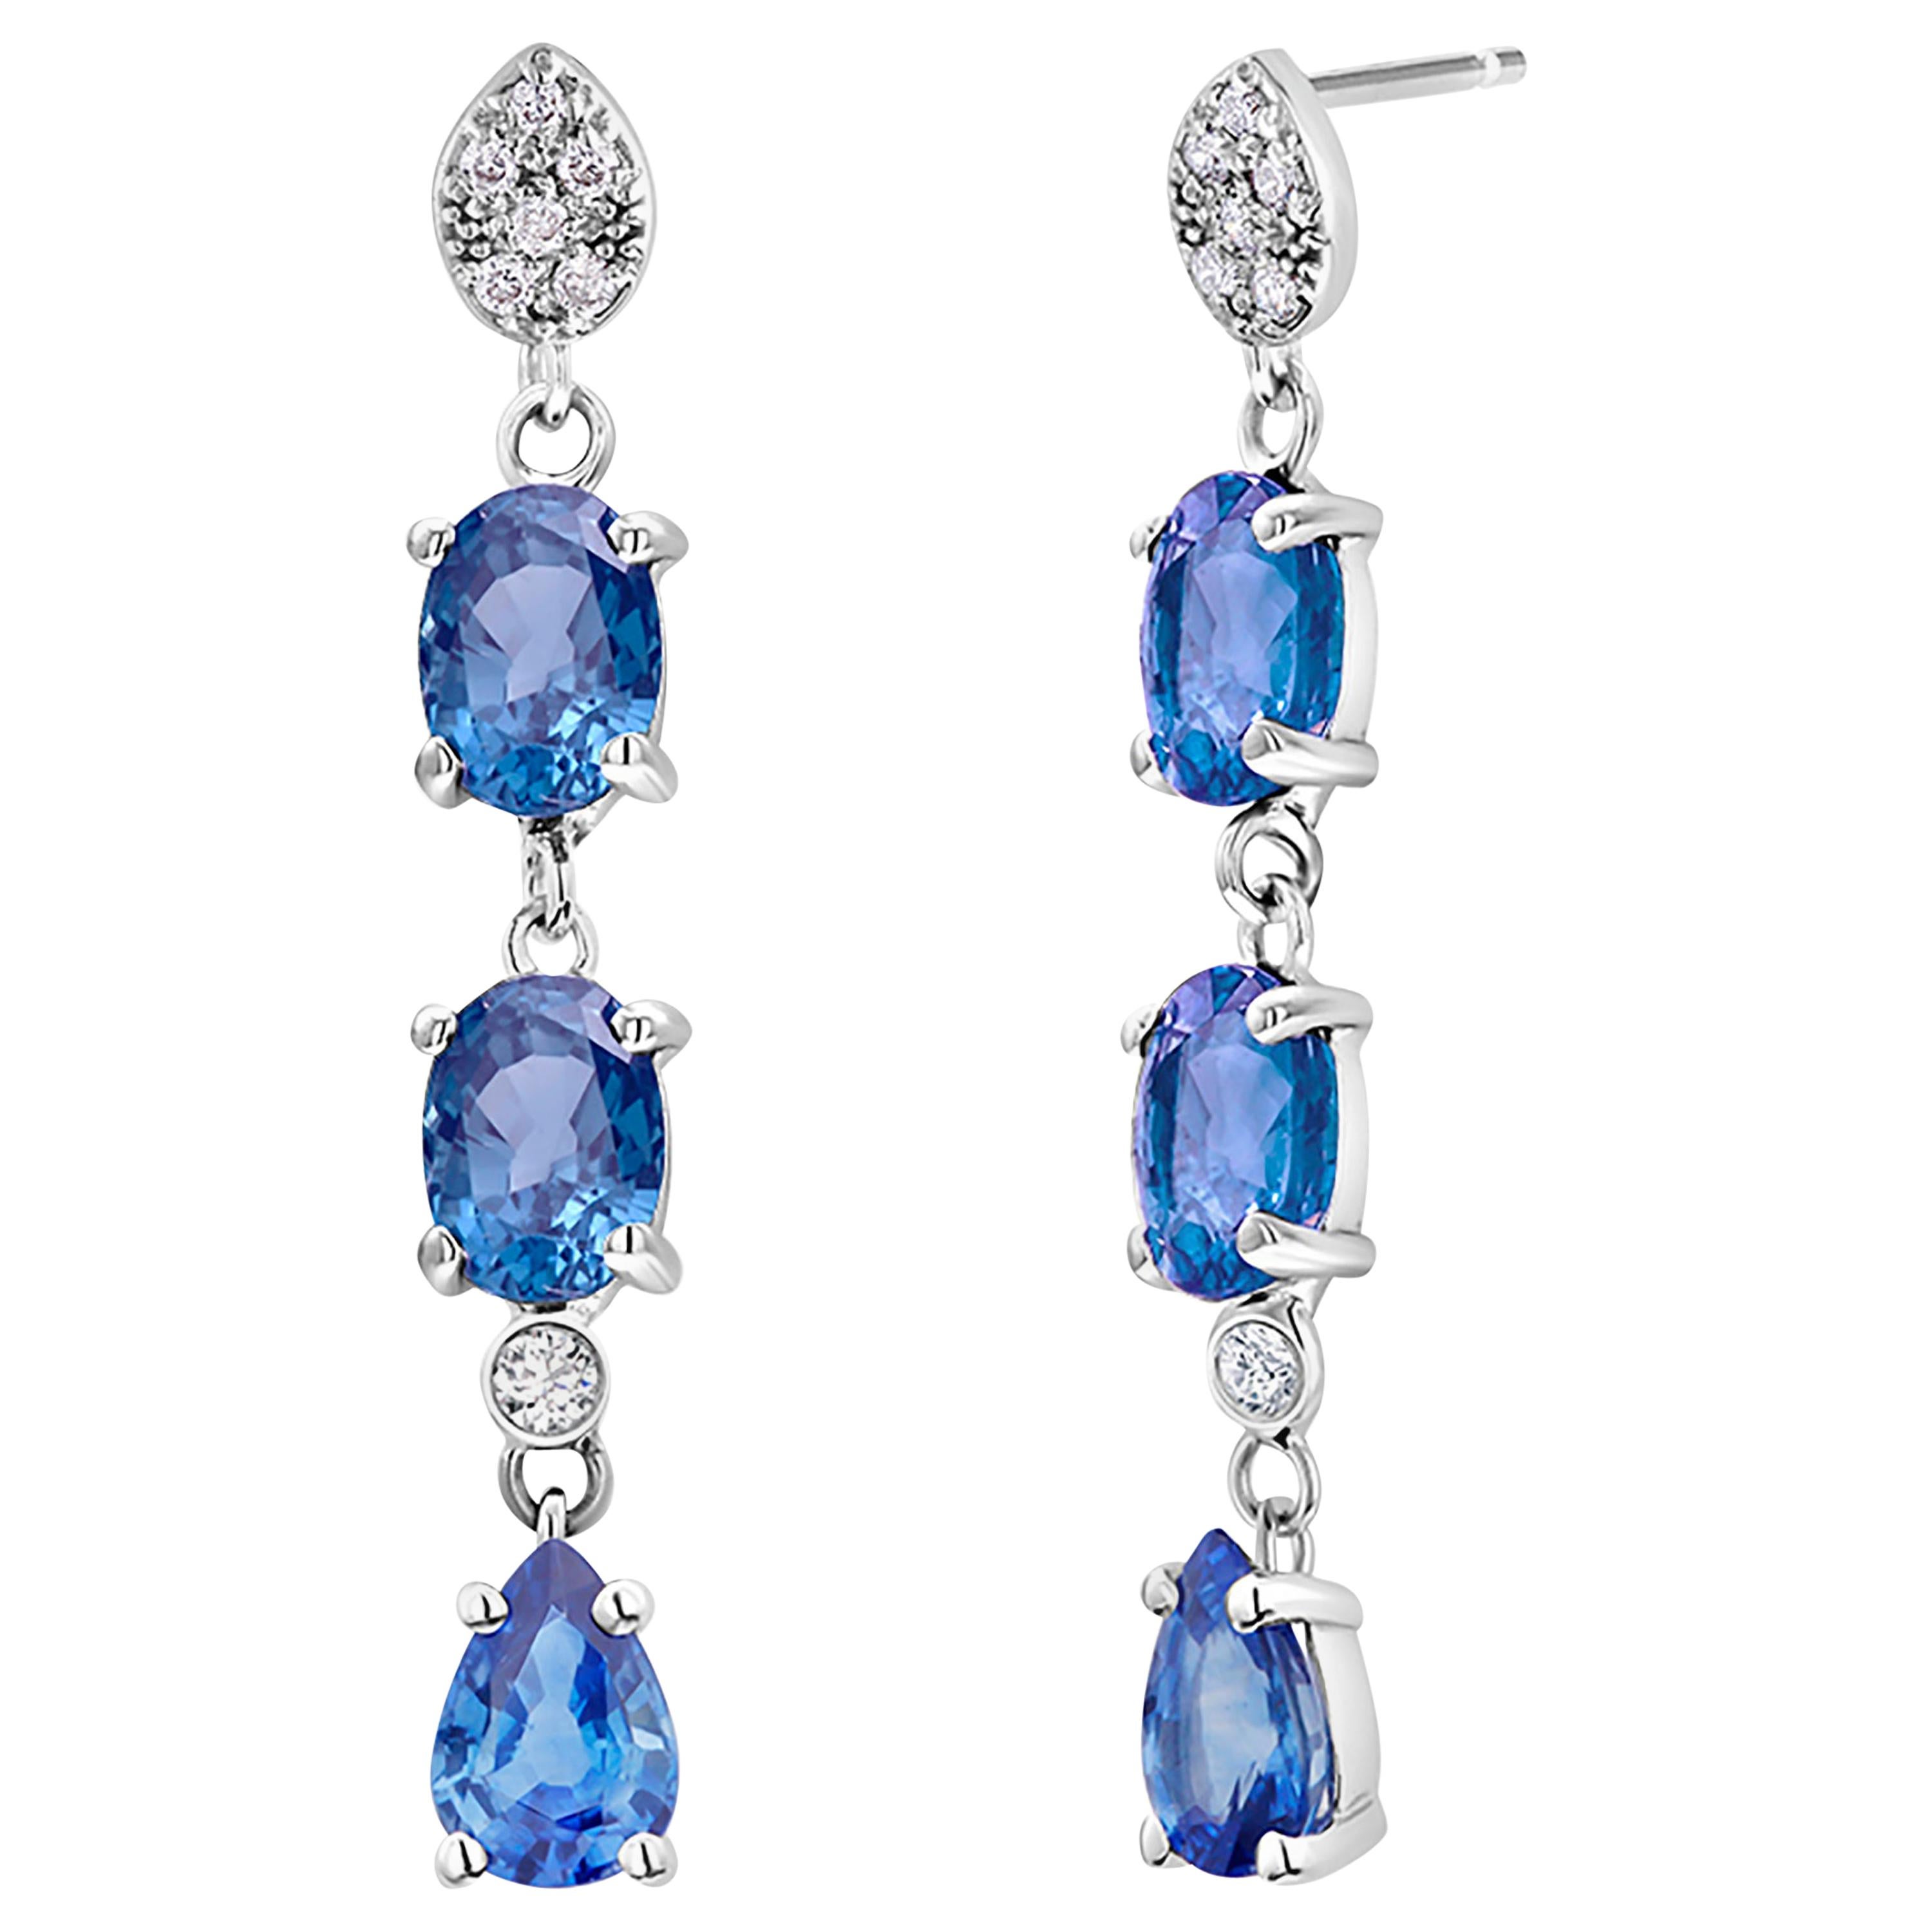 Fourteen karats white gold drop earrings two-inch long
Diamonds weighing 0.30 carat 
Four oval and two pear shape vibrant, vivid, and brilliant Ceylon sapphires weighing 3.30 carat
Sapphire hue color: cornflower blue
One of a kind earrings
New